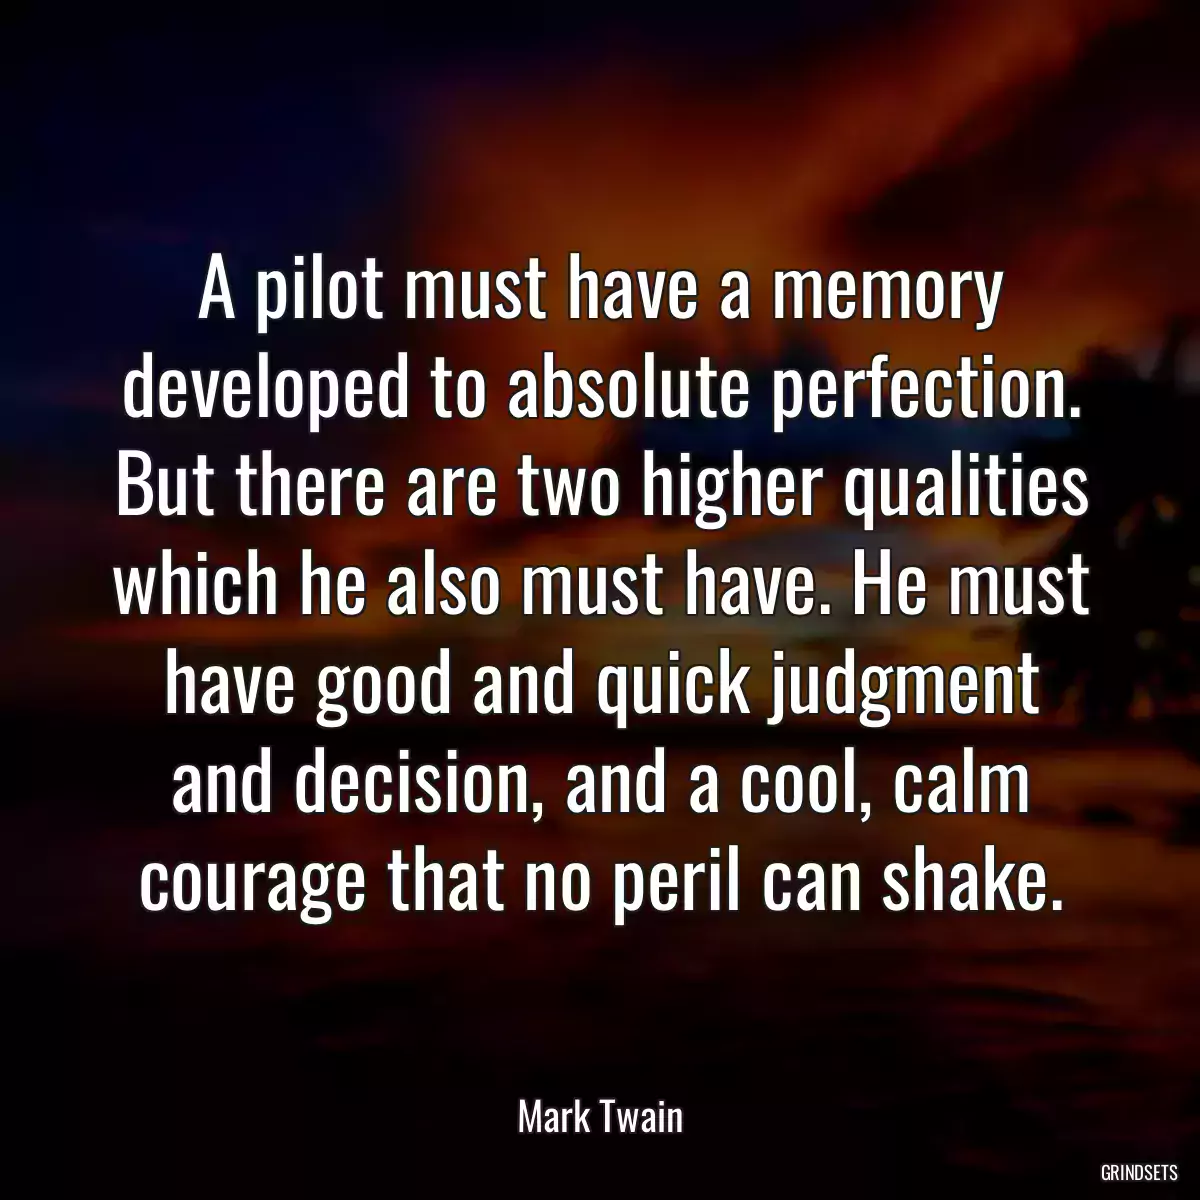 A pilot must have a memory developed to absolute perfection. But there are two higher qualities which he also must have. He must have good and quick judgment and decision, and a cool, calm courage that no peril can shake.